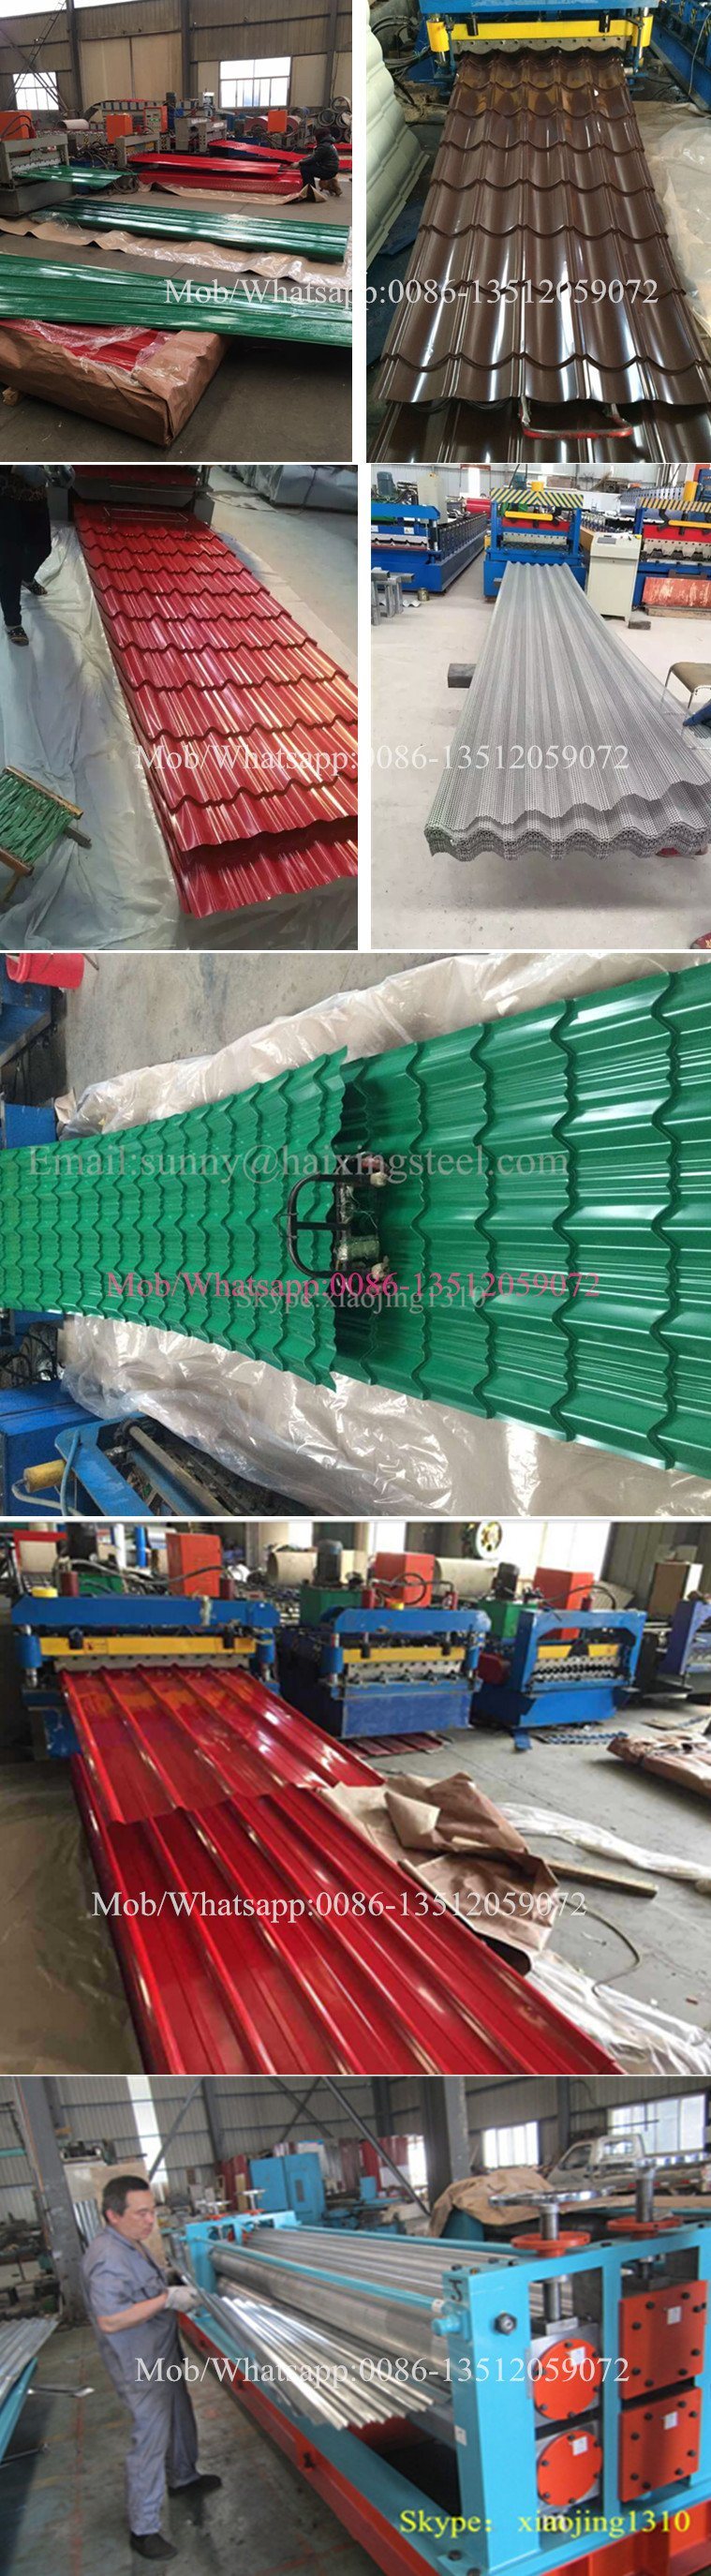 Prepainted Corrugated Galvanized Steel Roofing Sheets